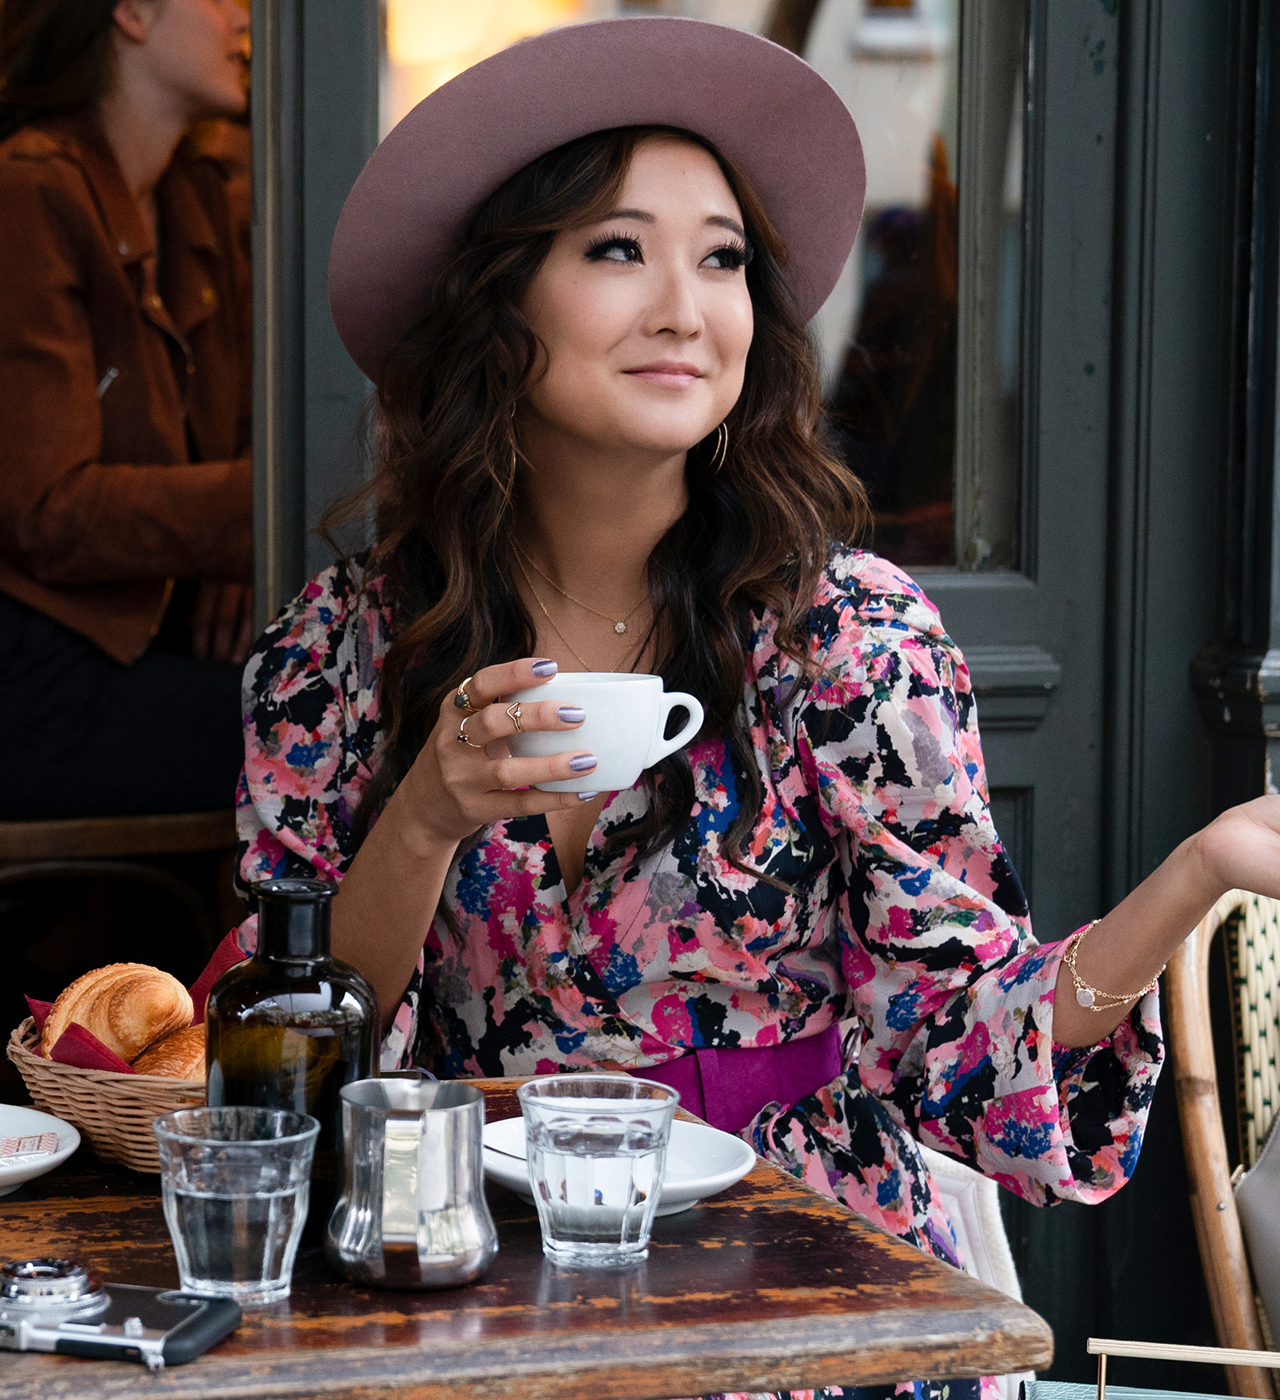 Mindy Chen (played by Ashley Park) wearing floral IRO dress in 'Emily in Paris'